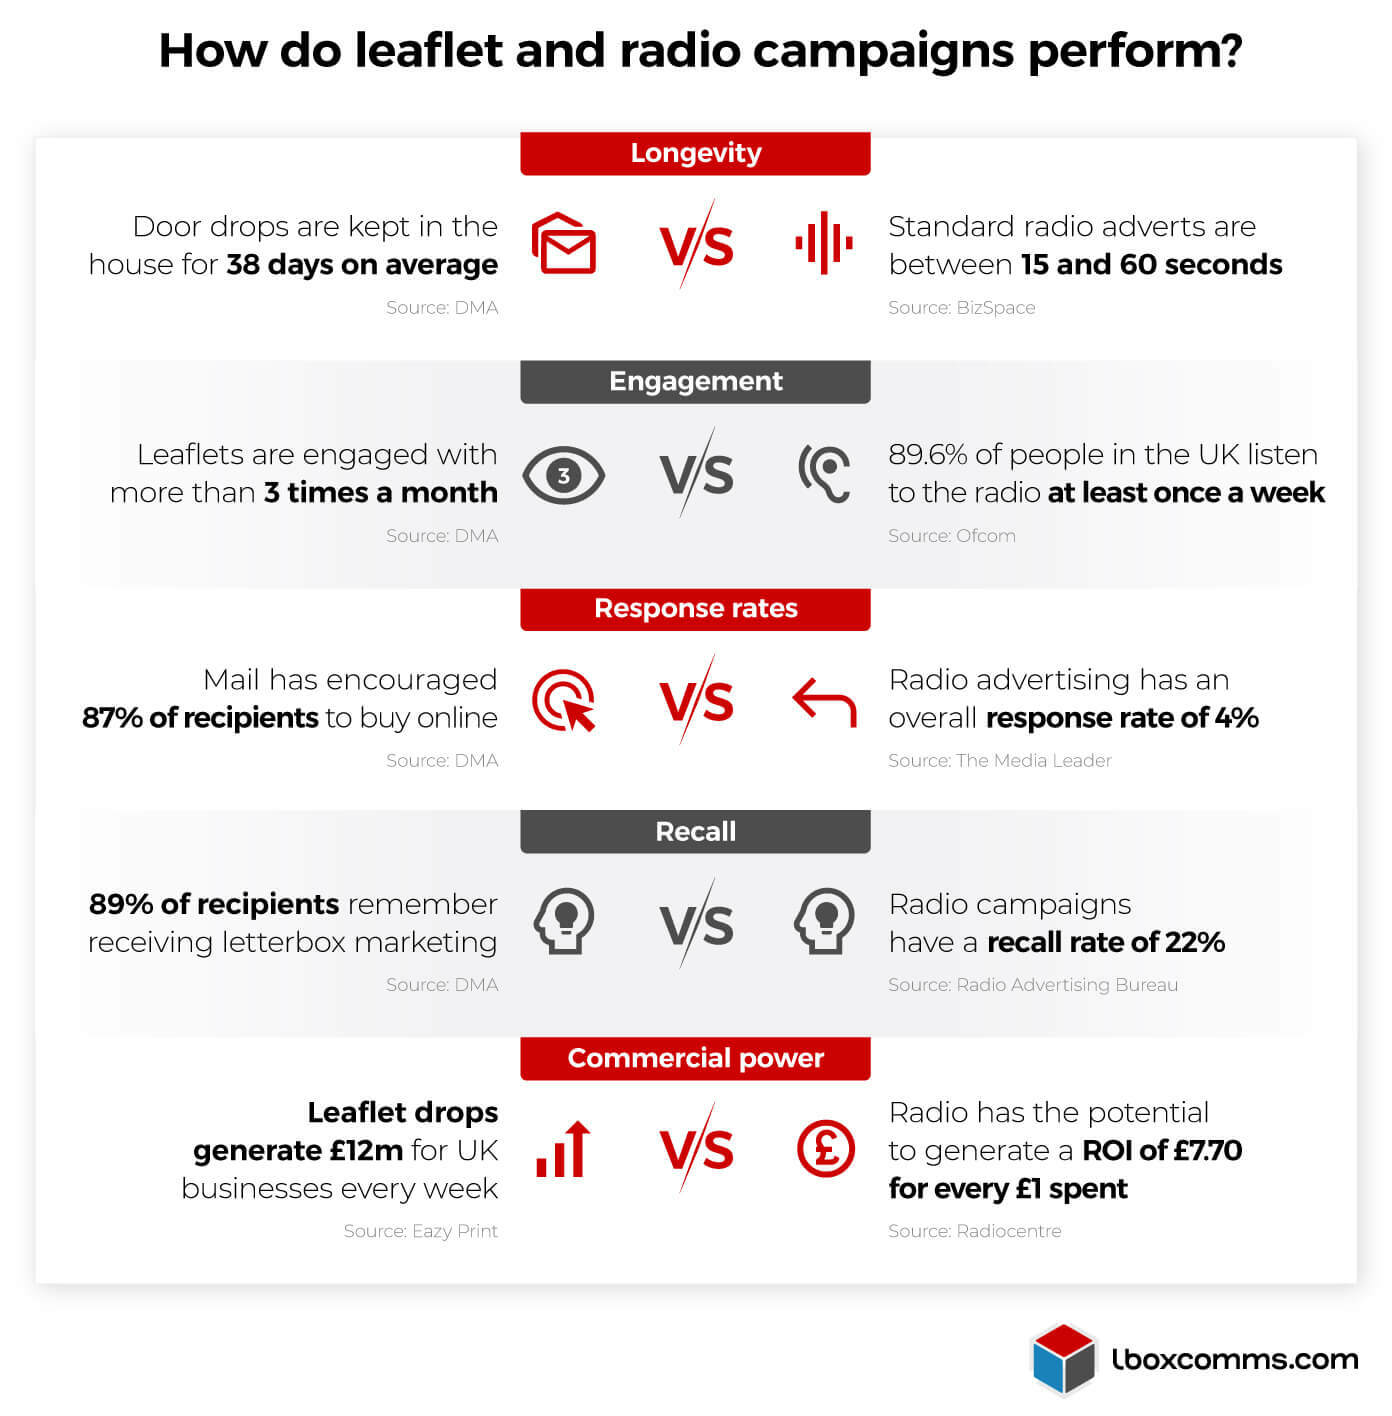 Leaflet vs radio campaigns performance stats based on longevity, Engagement, Response Rate and Recall - Infographic